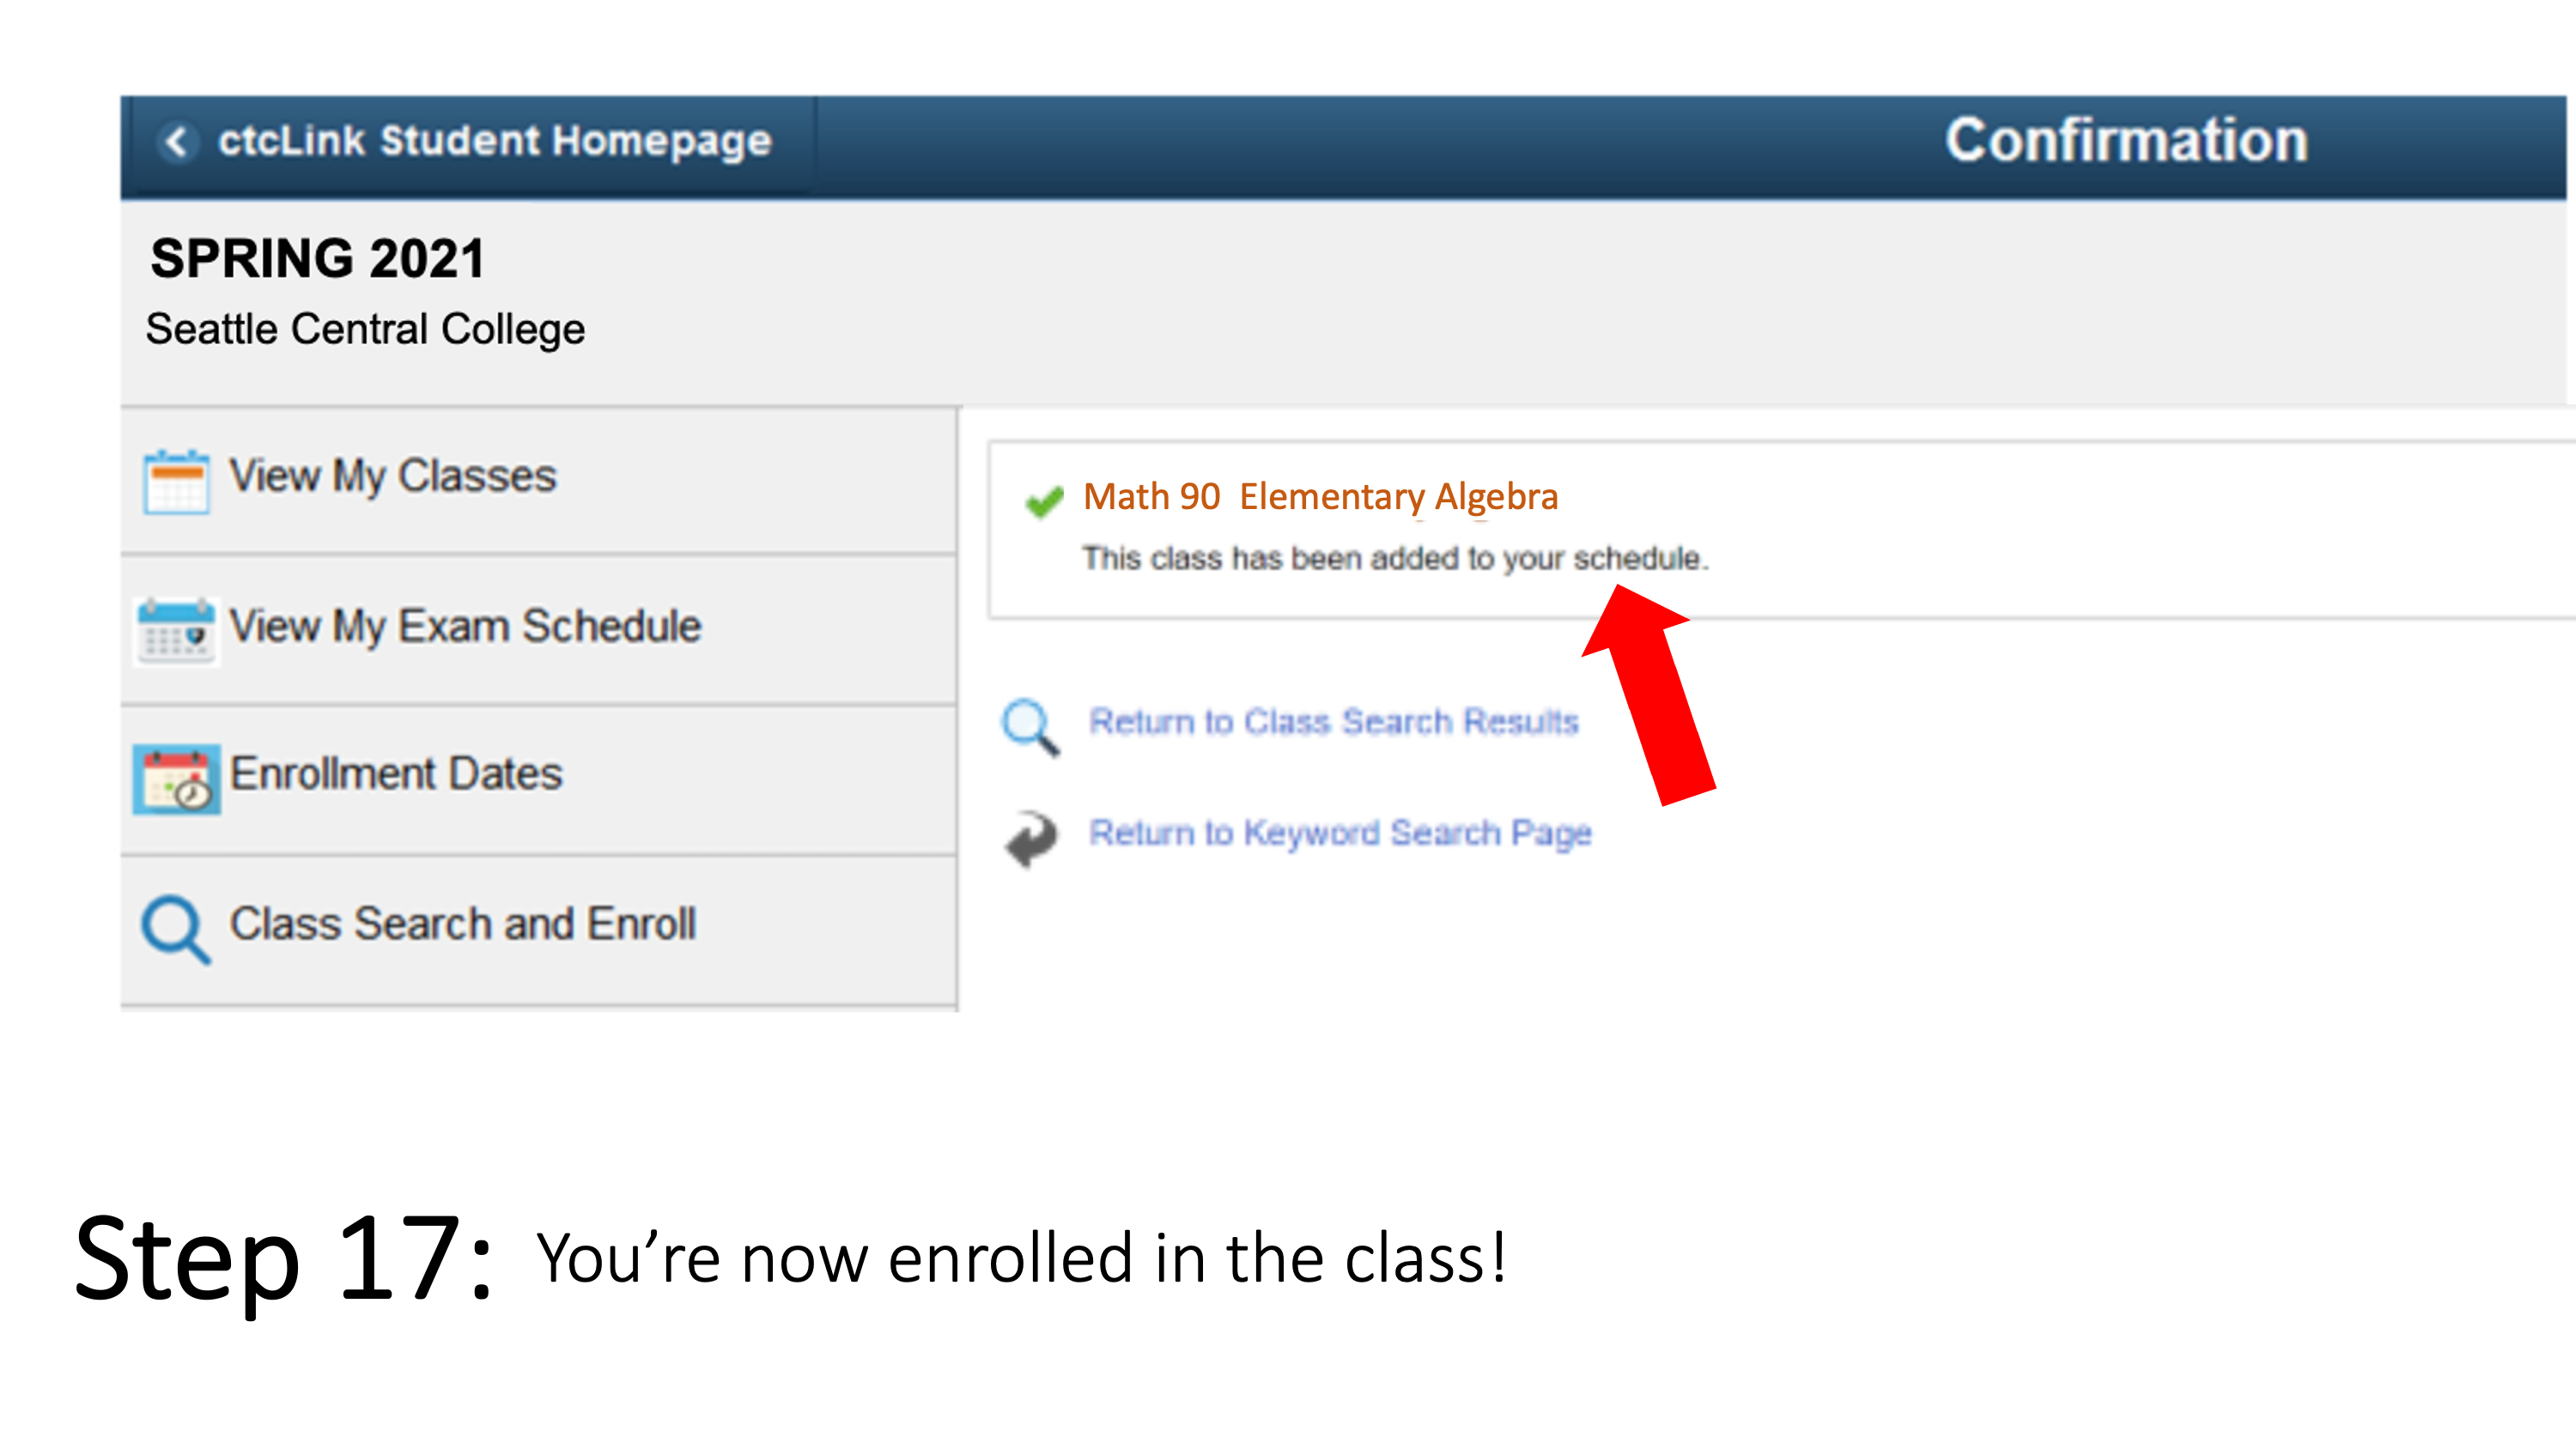 You’re now enrolled in the class!